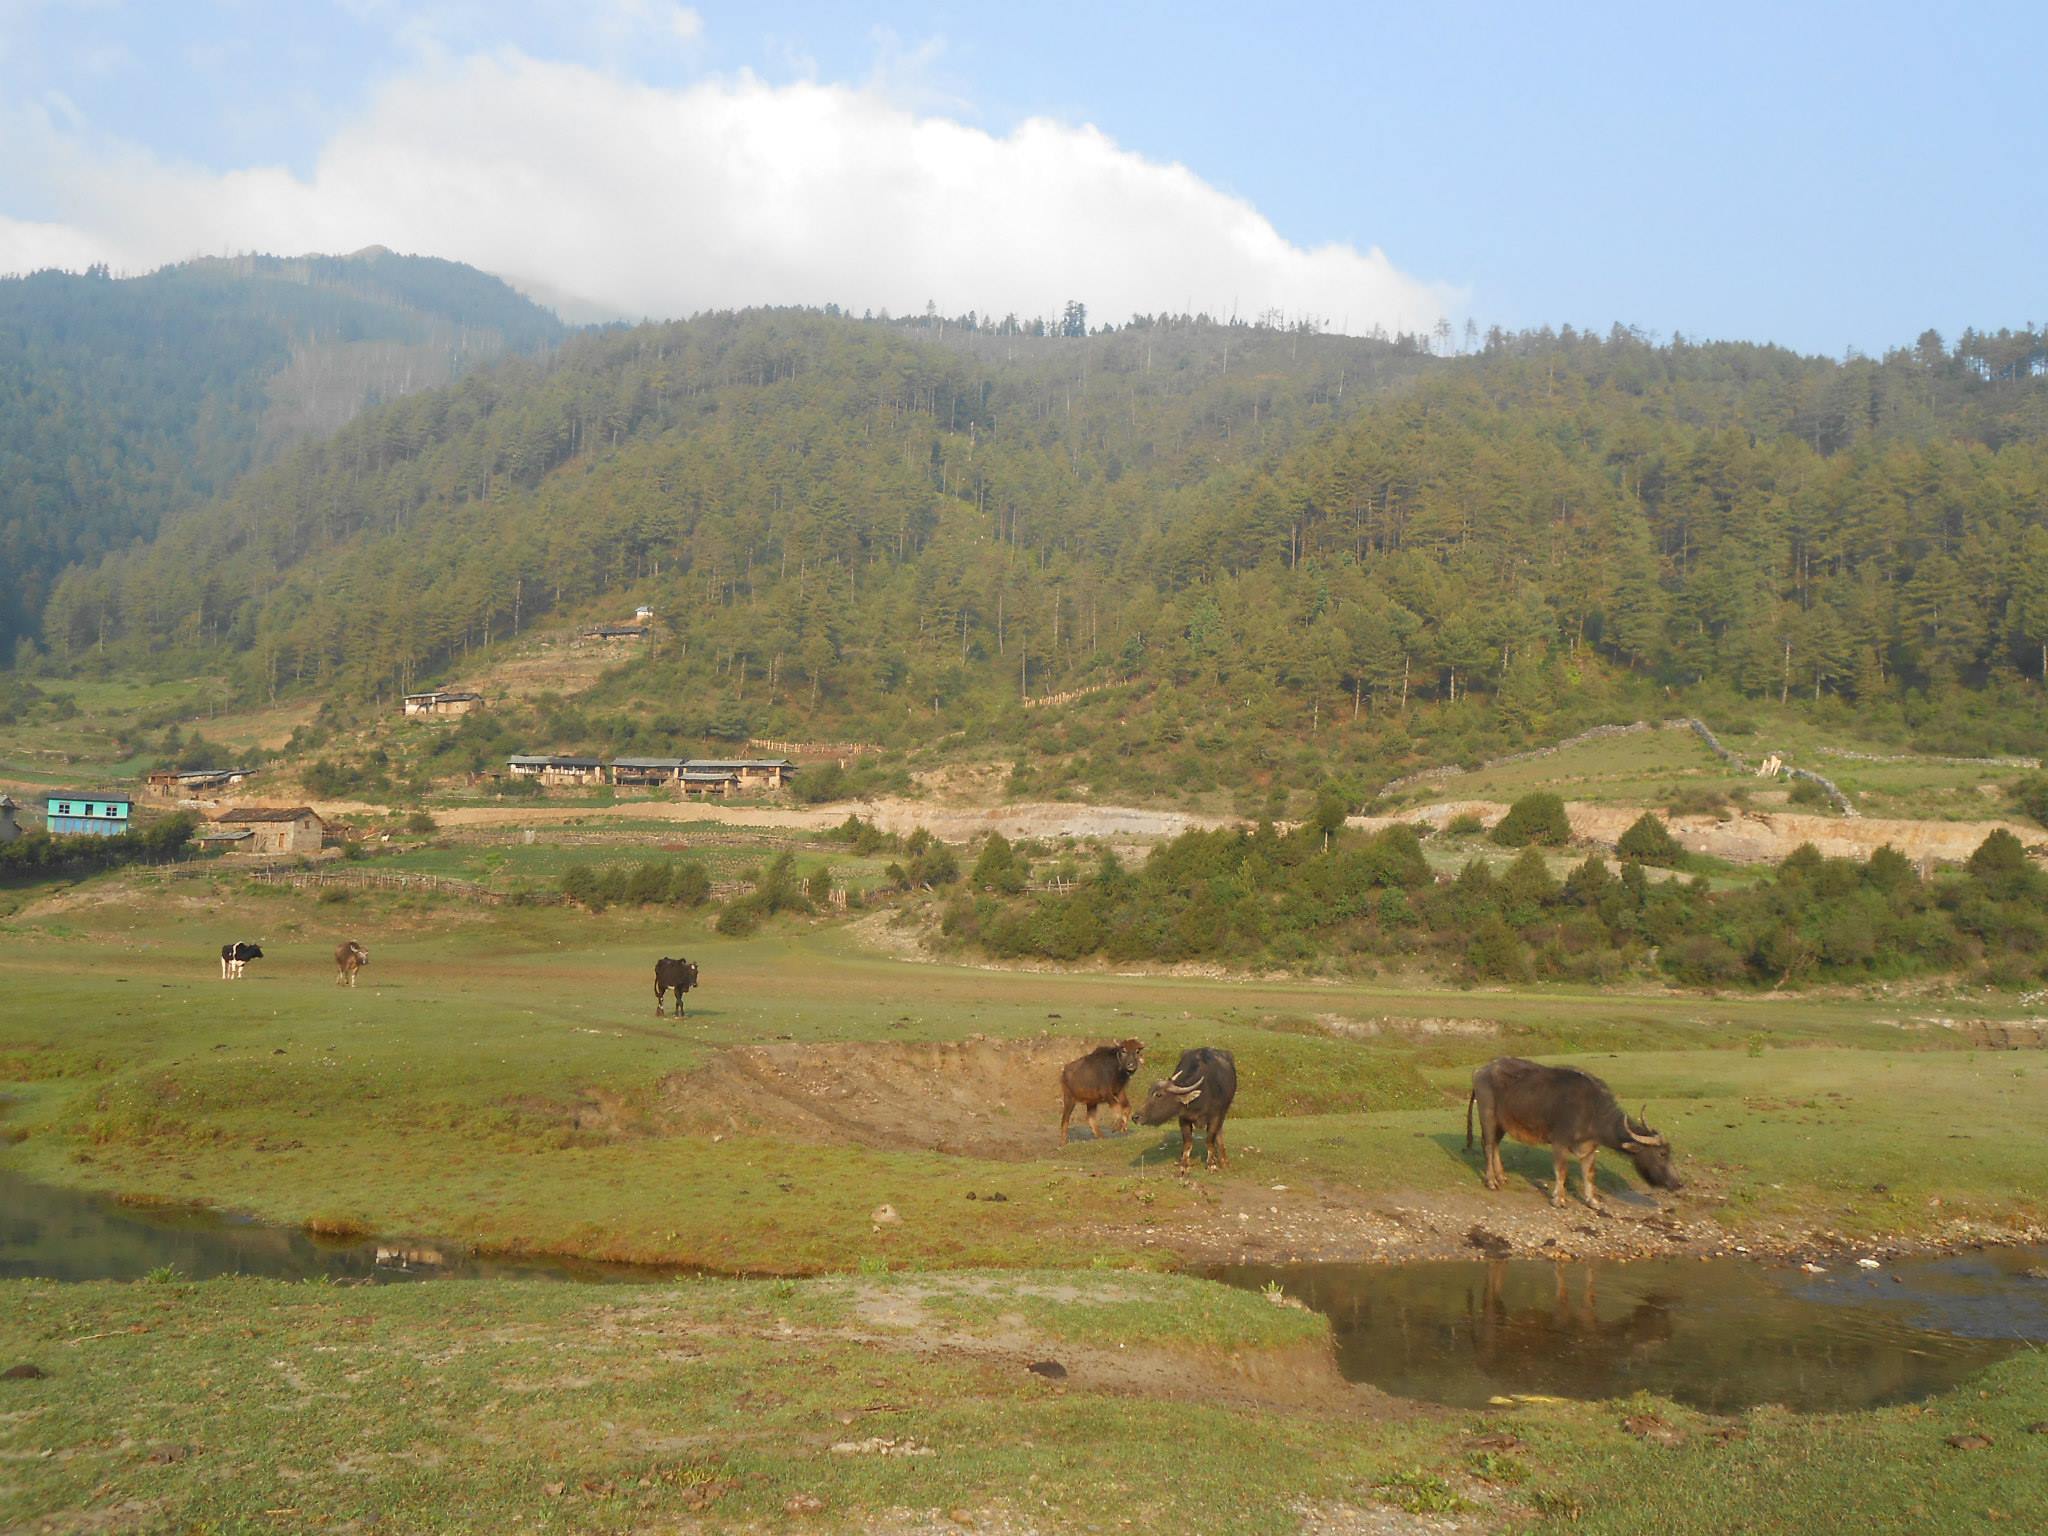 Dhorpatan hunting reserve’s 182 hectares land encroached